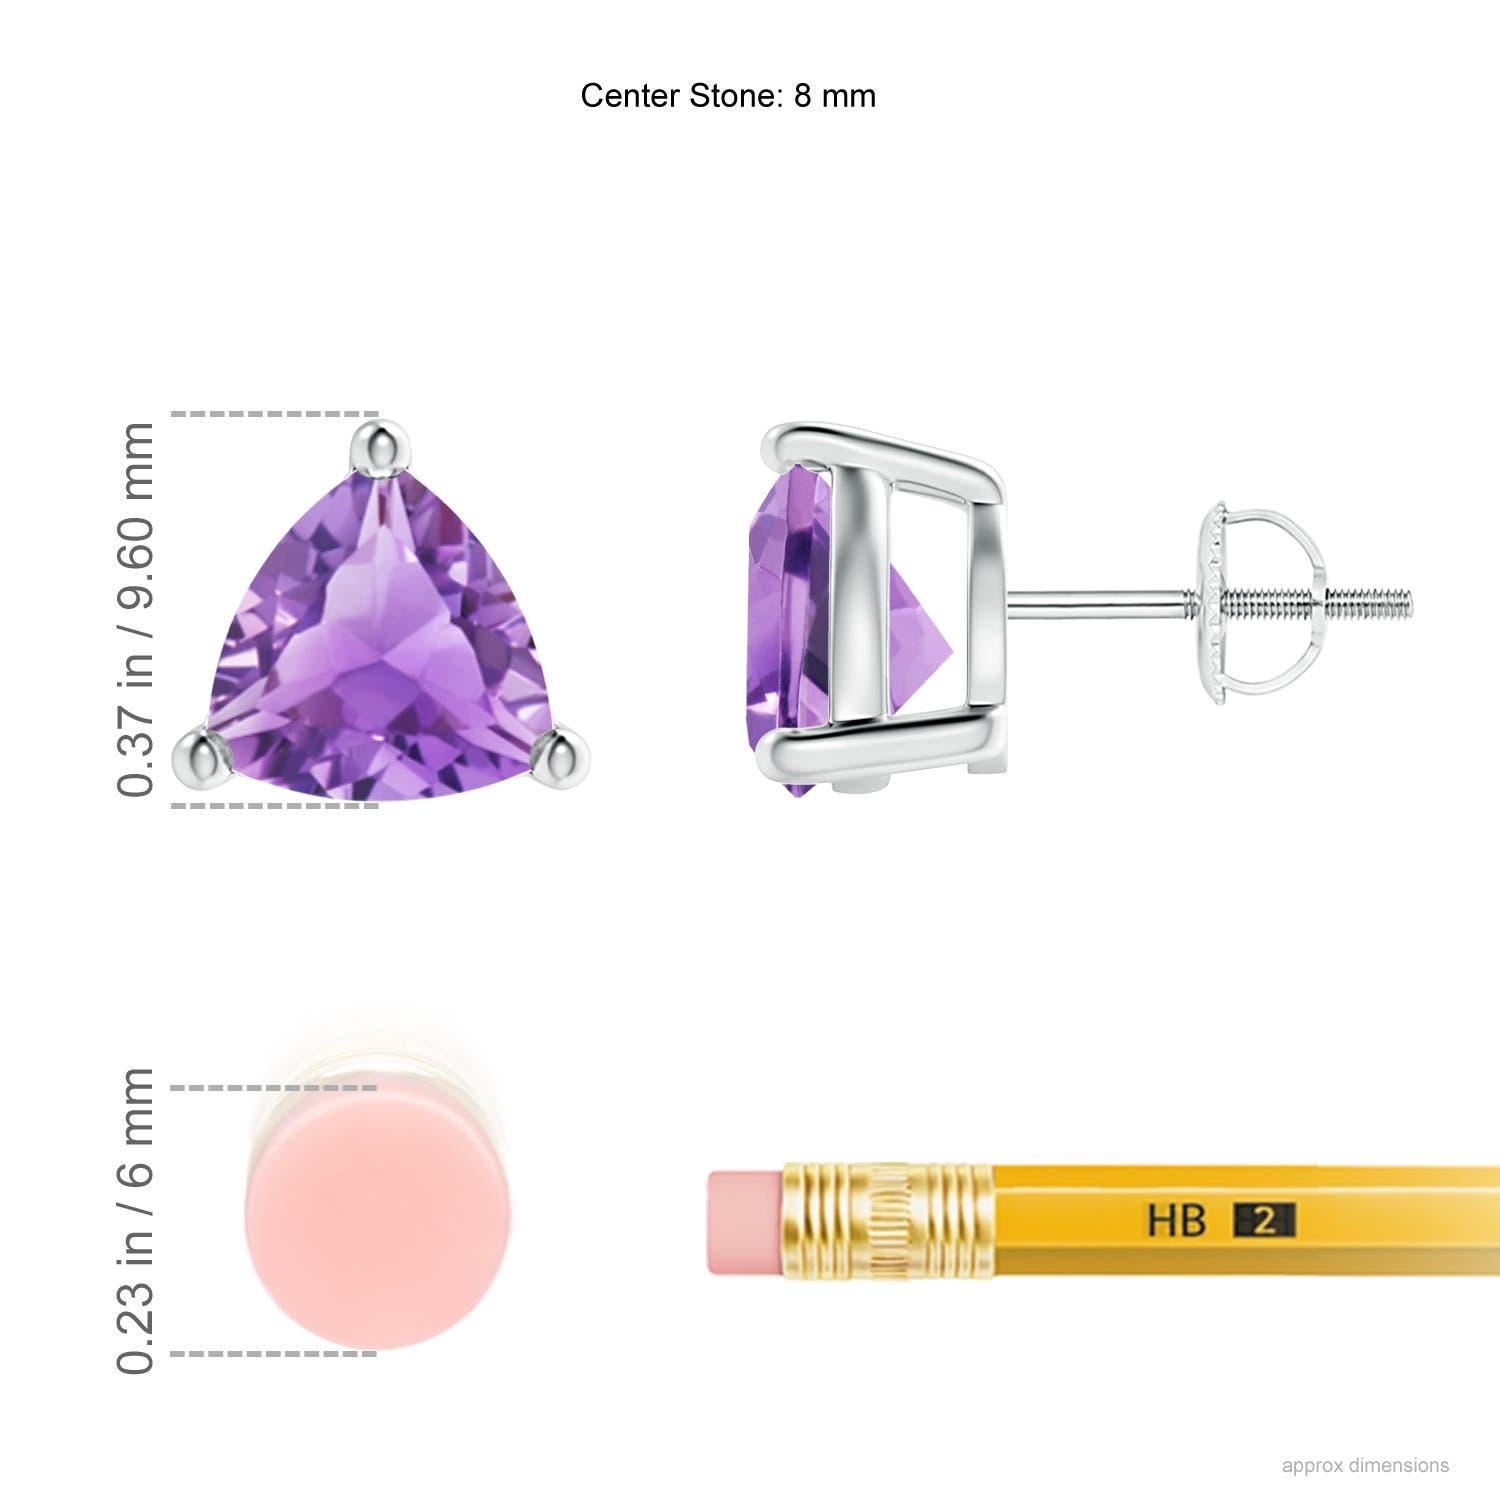 Displaying the royal purple amethysts in a prong setting, these solitaire stud earrings are a pair of enviable beauty. The gemstones are cut in a striking trillion shape and mounted in platinum.